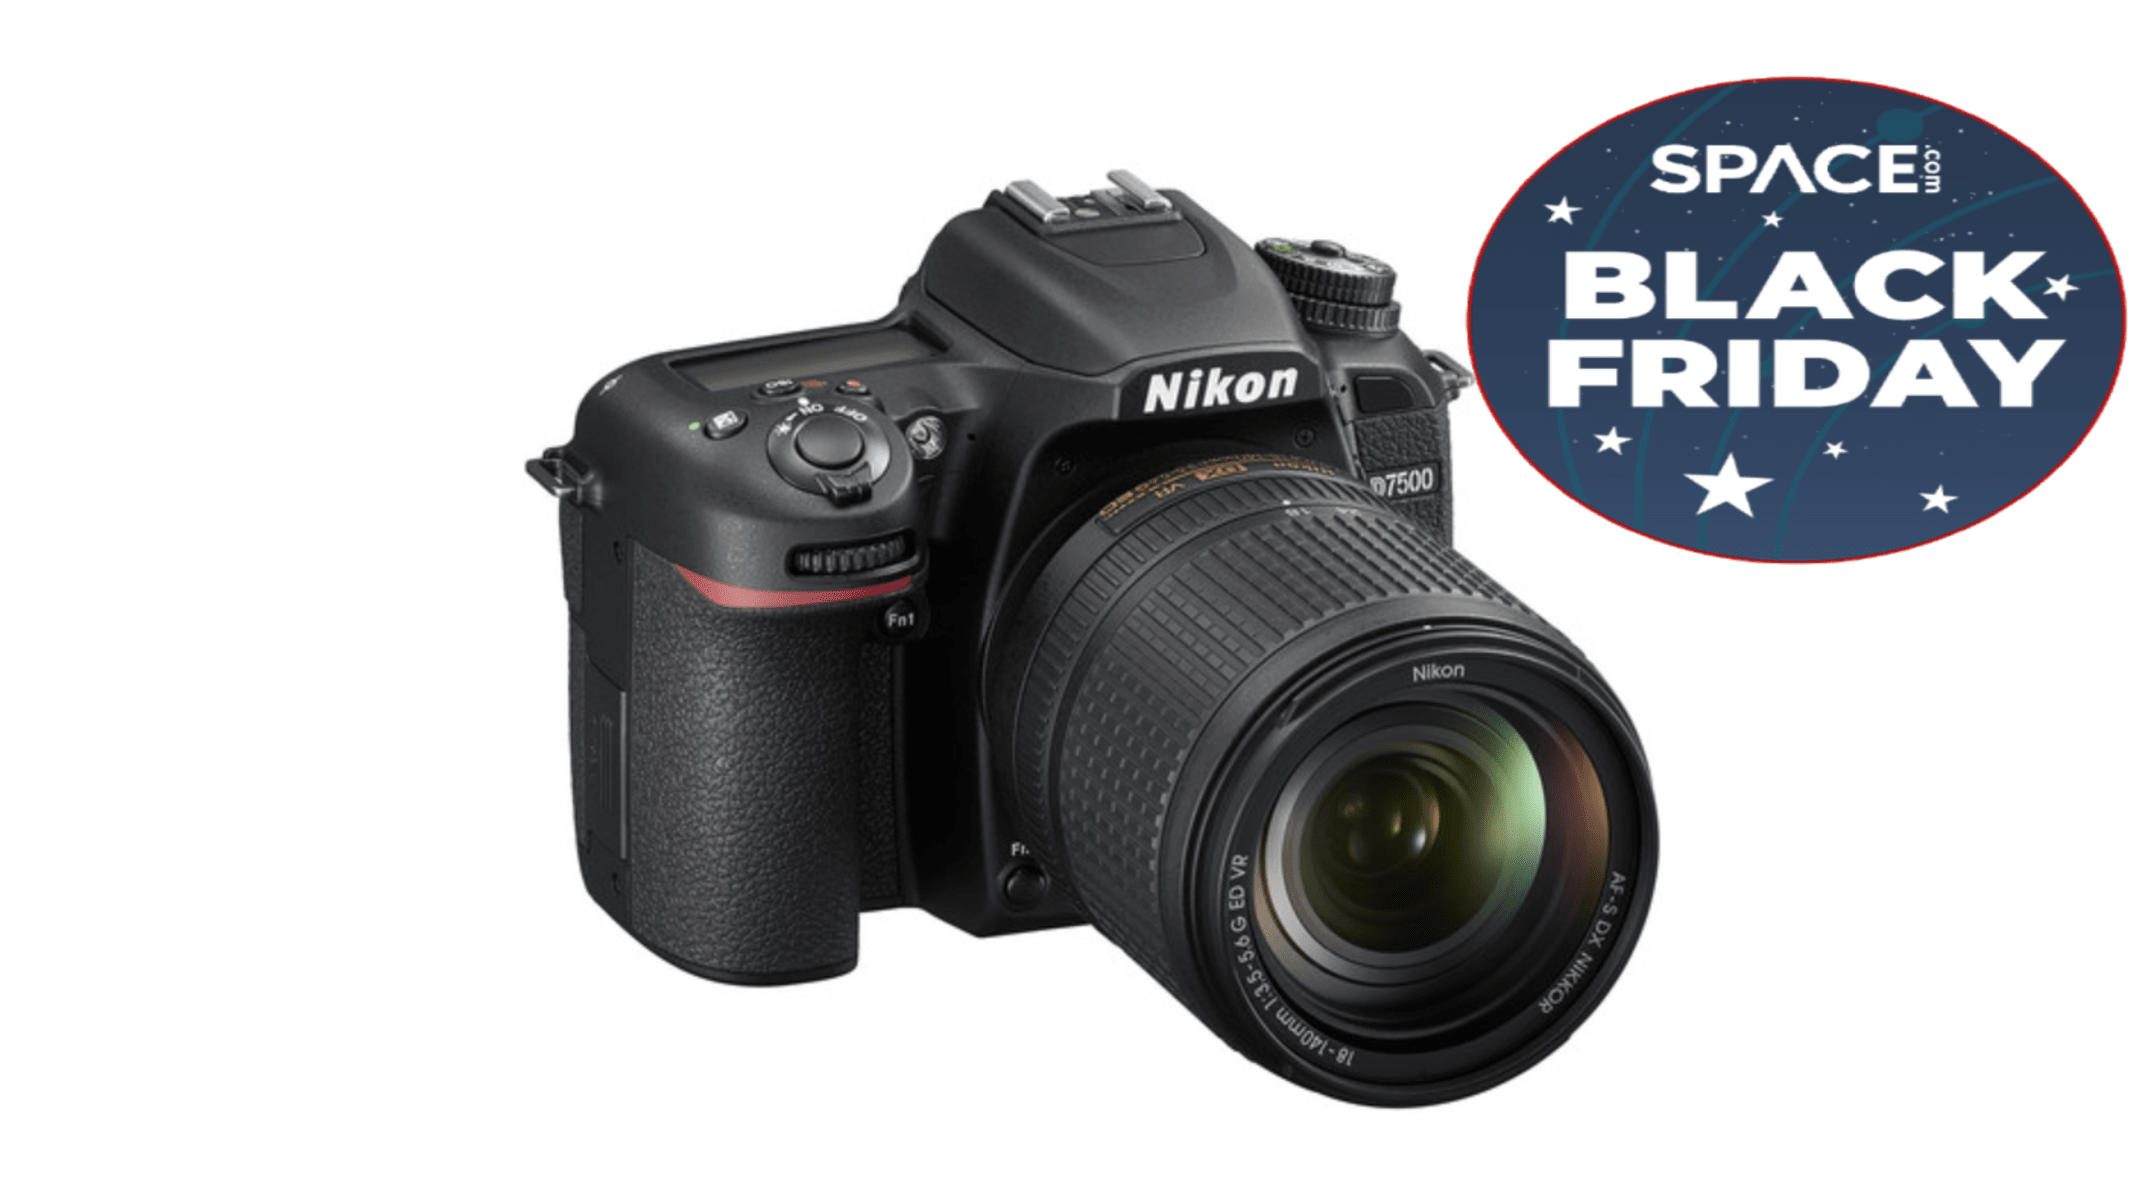 Get $300 off with this Nikon D7500 Black Friday deal